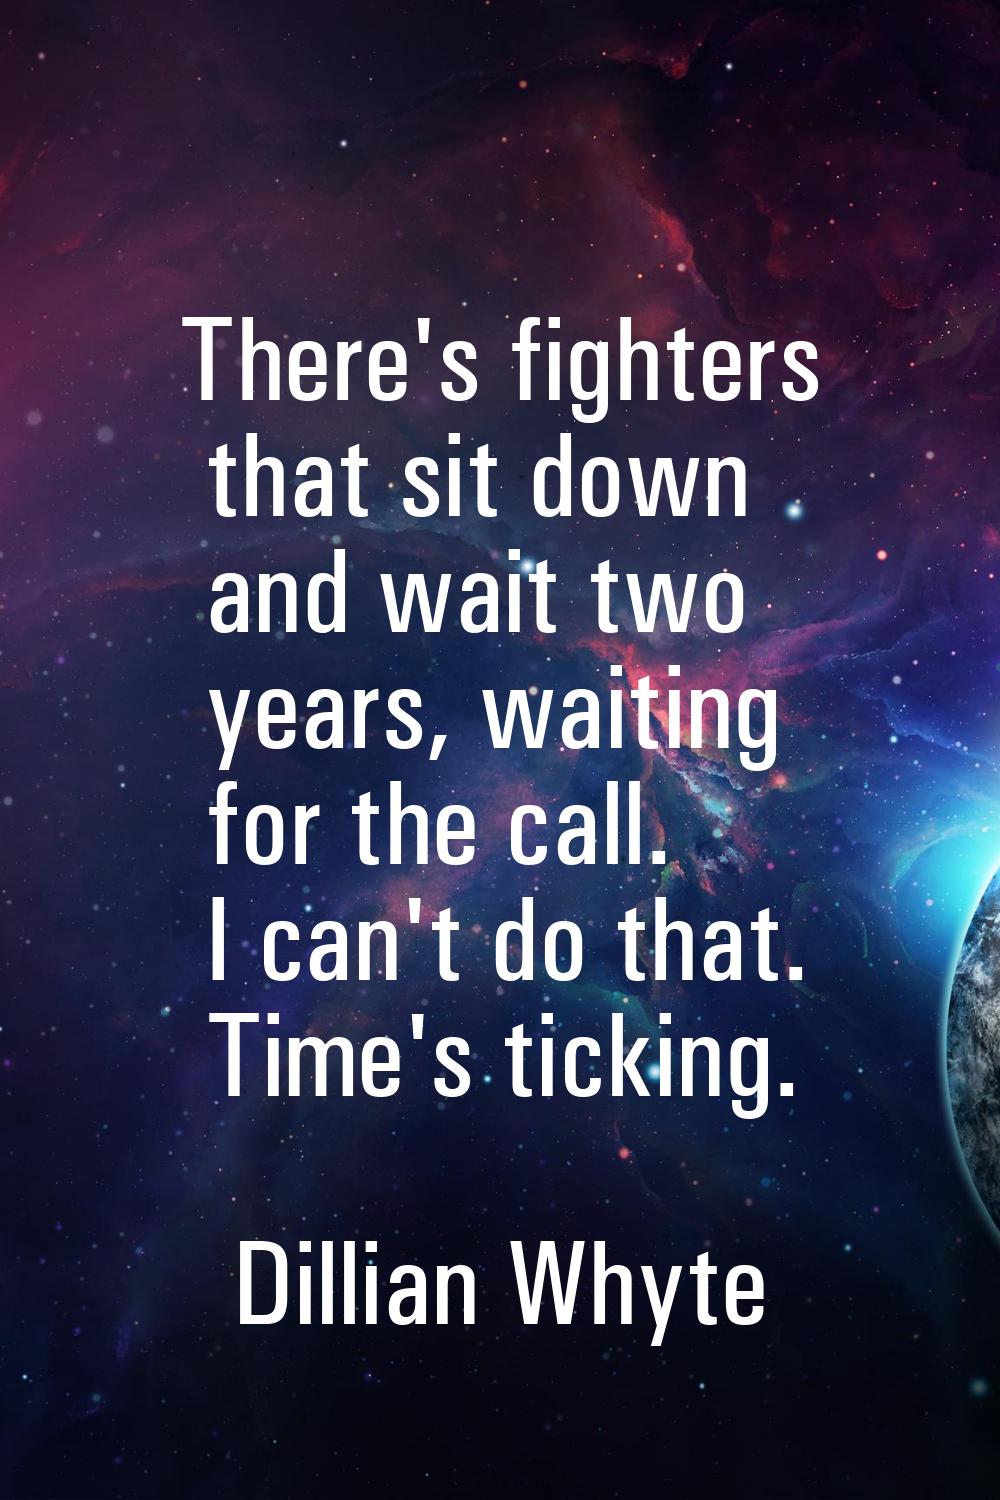 There's fighters that sit down and wait two years, waiting for the call. I can't do that. Time's ti